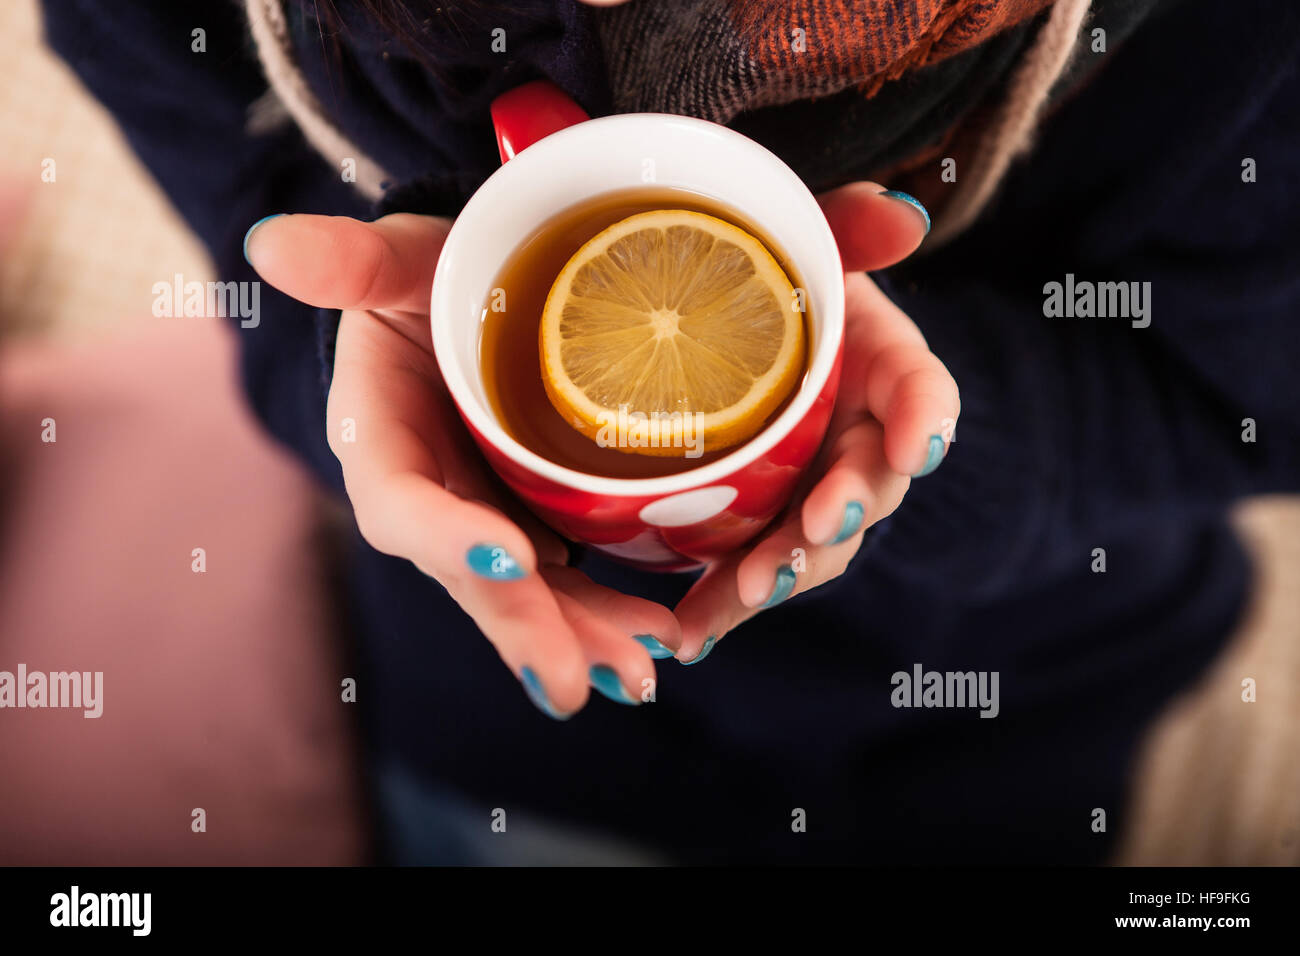 Woman's hand holding cup of tea with lemon on a cold day Stock Photo